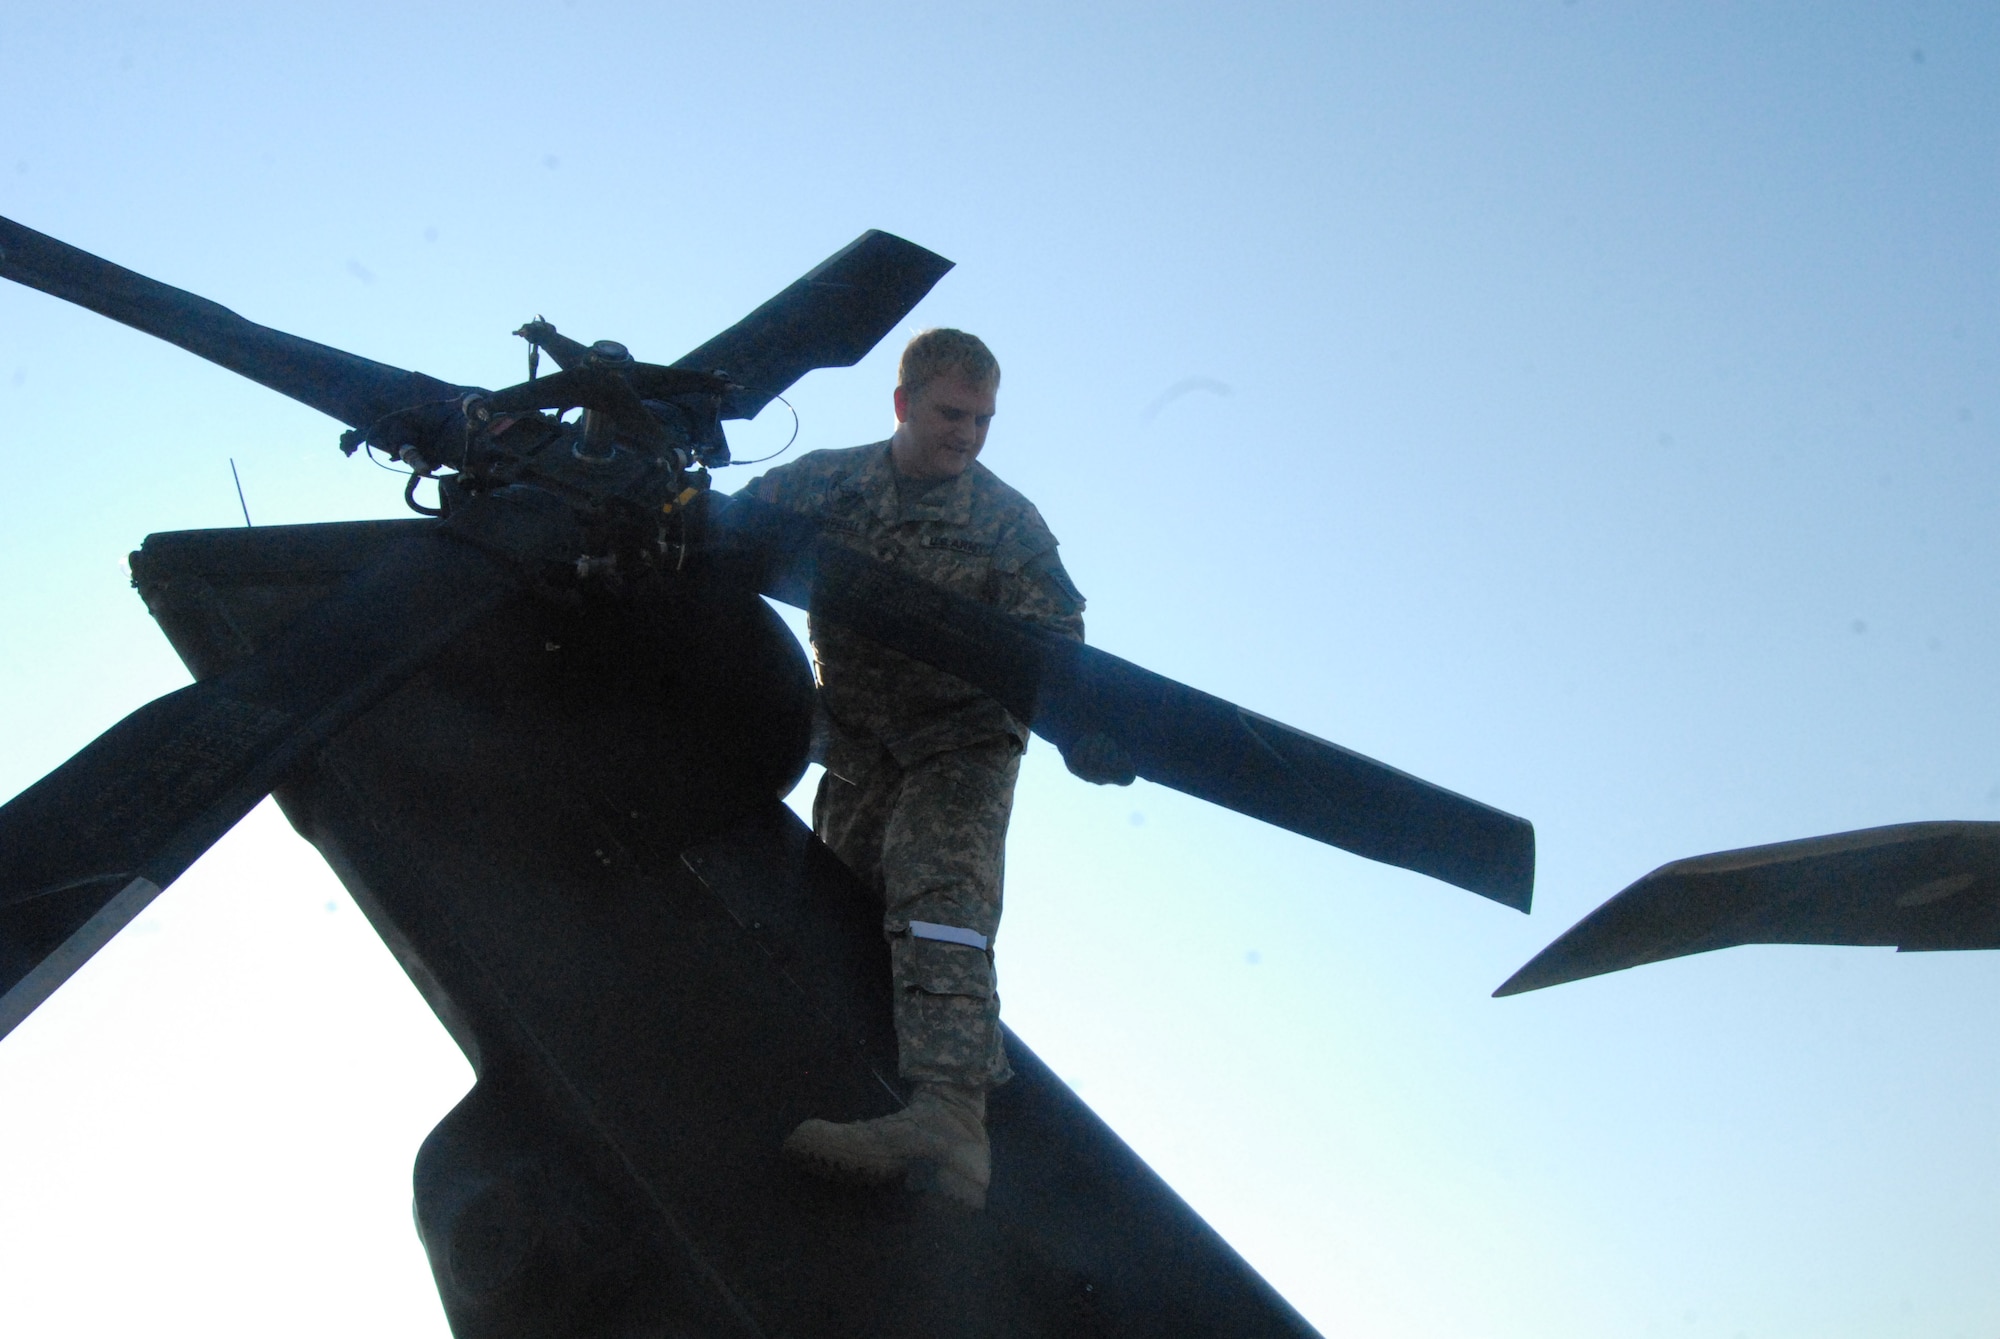 Chief Warrant Officer Mike Campbell, a UH-60 Black Hawk pilot, performs a routine maintenance check on the tail rotor of his aircraft prior to takeoff from Simmons Army Airfield July 16. (U.S. Air Force Photo by 2nd Lt. Chris Hoyler)